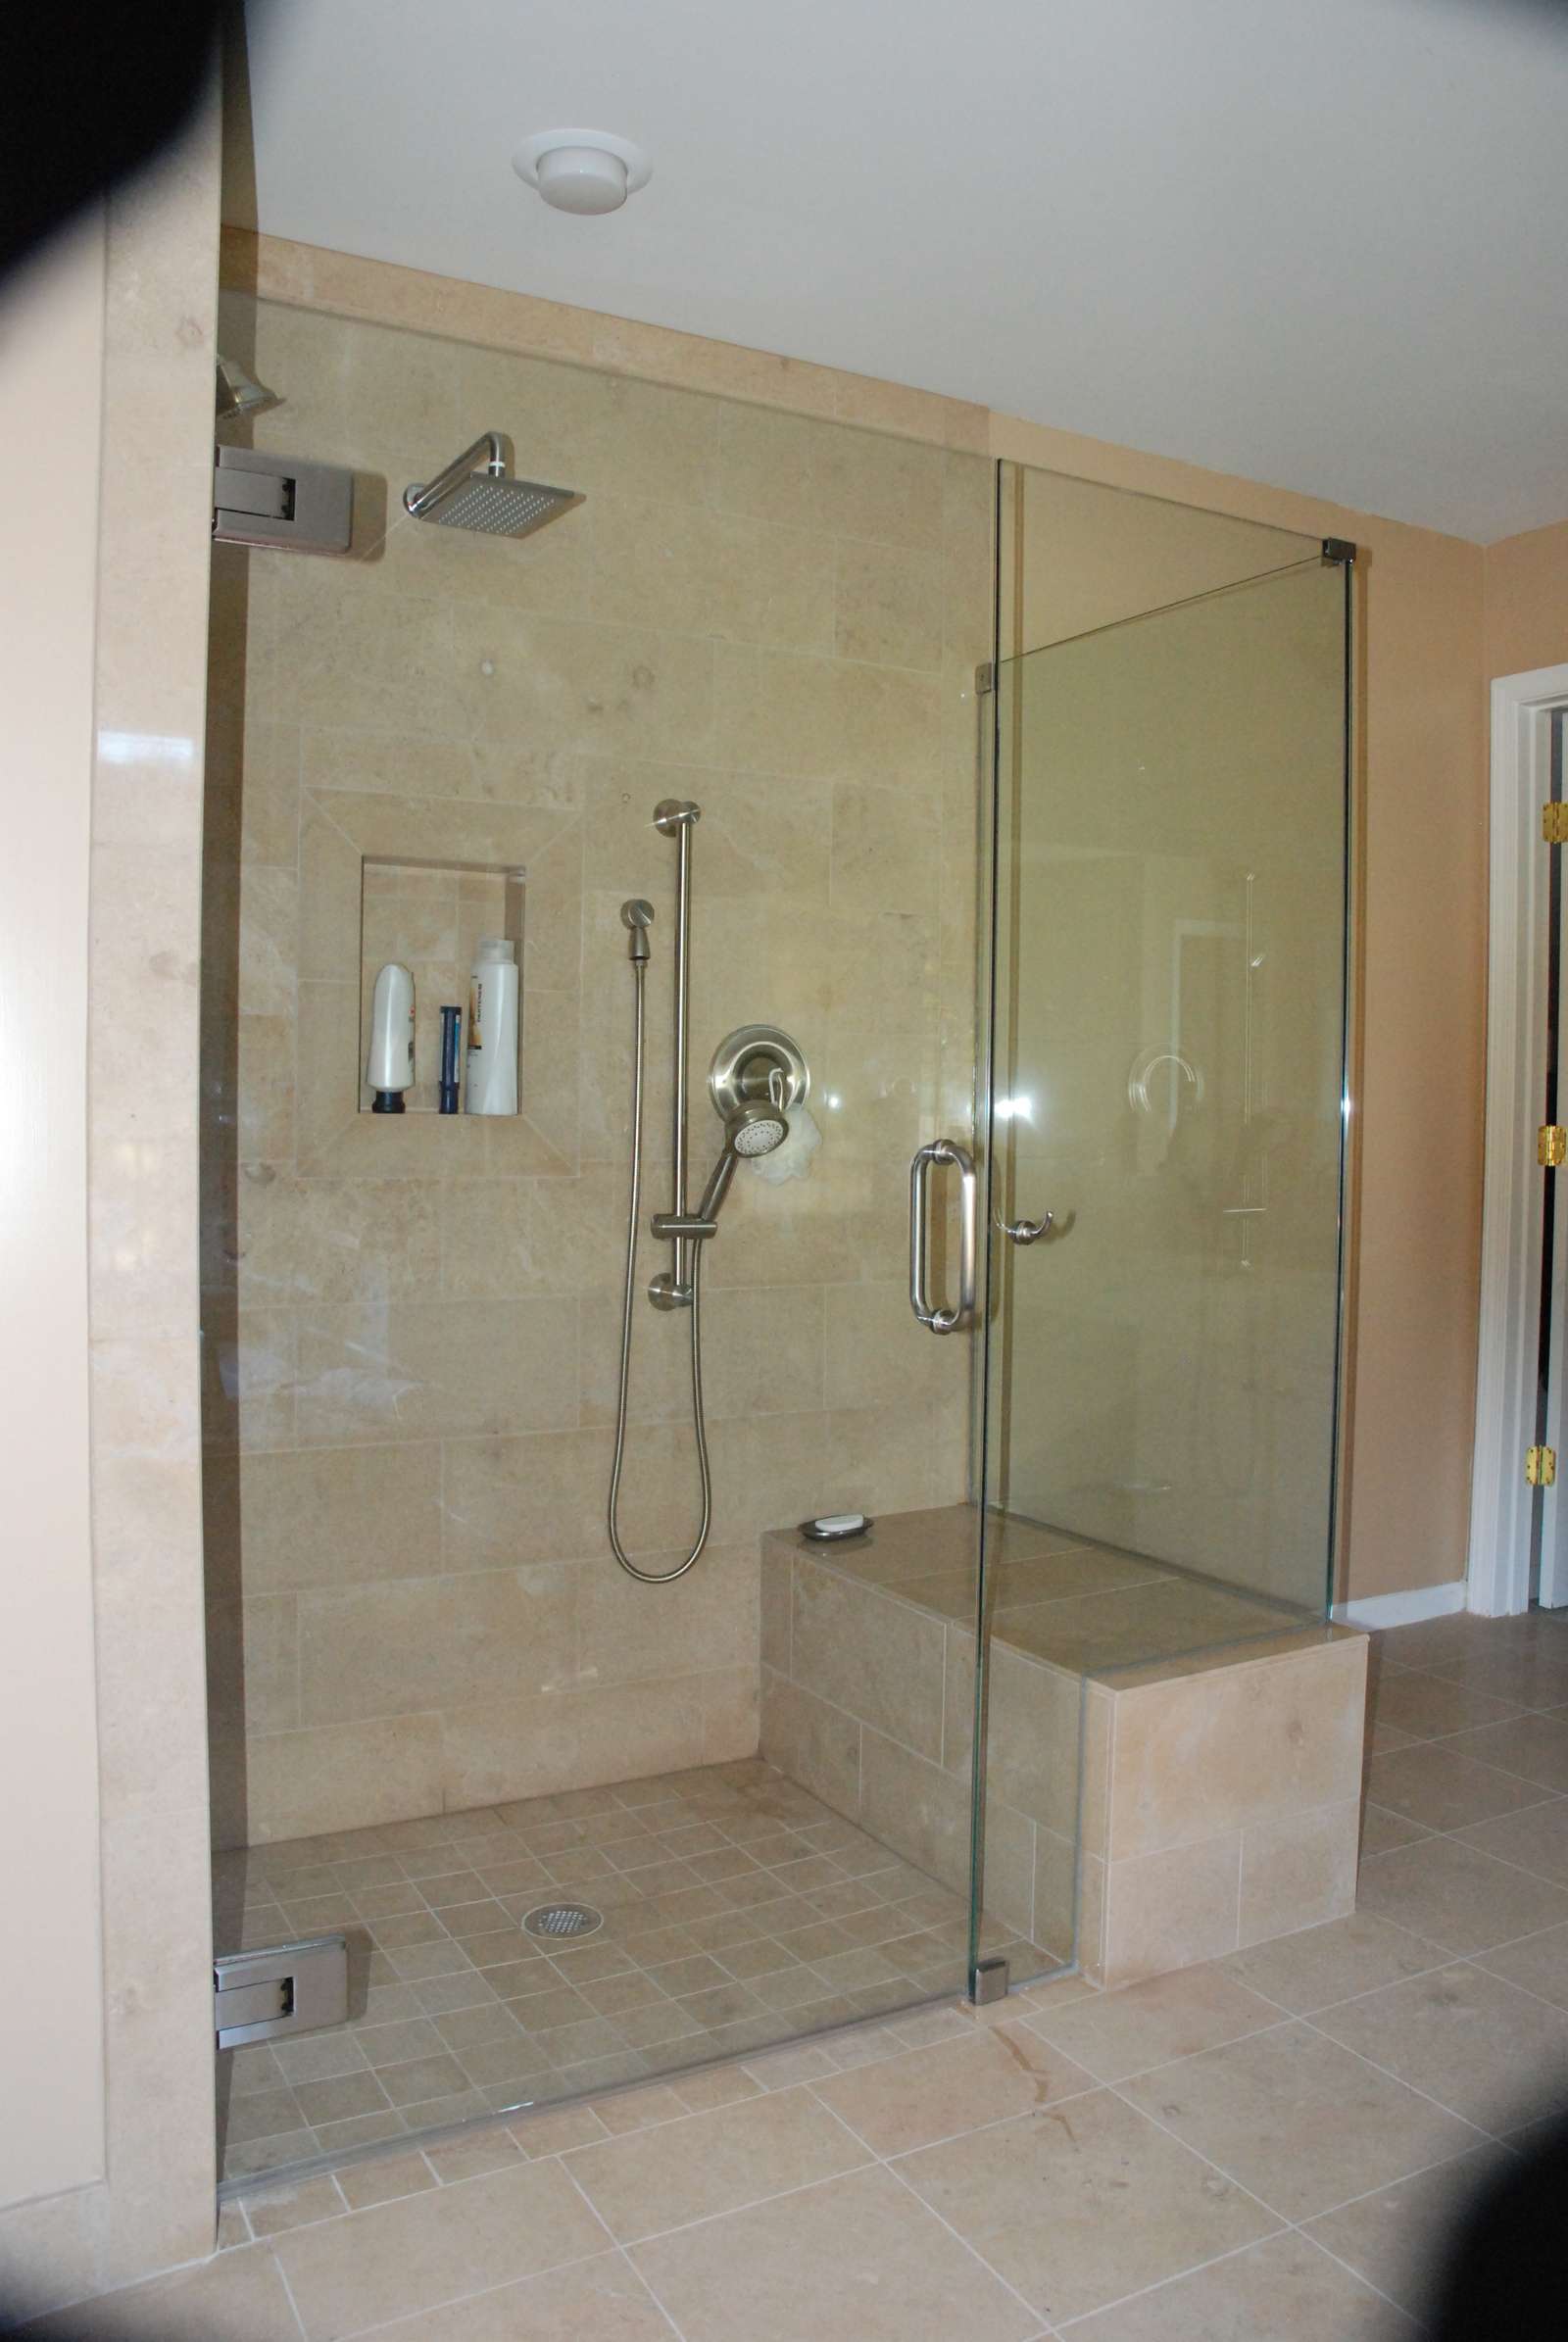 This is a handicap shower enclosure for full wheelchair access using hydraulic Atlas hinges. This hinge accommodates up to 39" wide opening with adjustable closing speeds and positions.